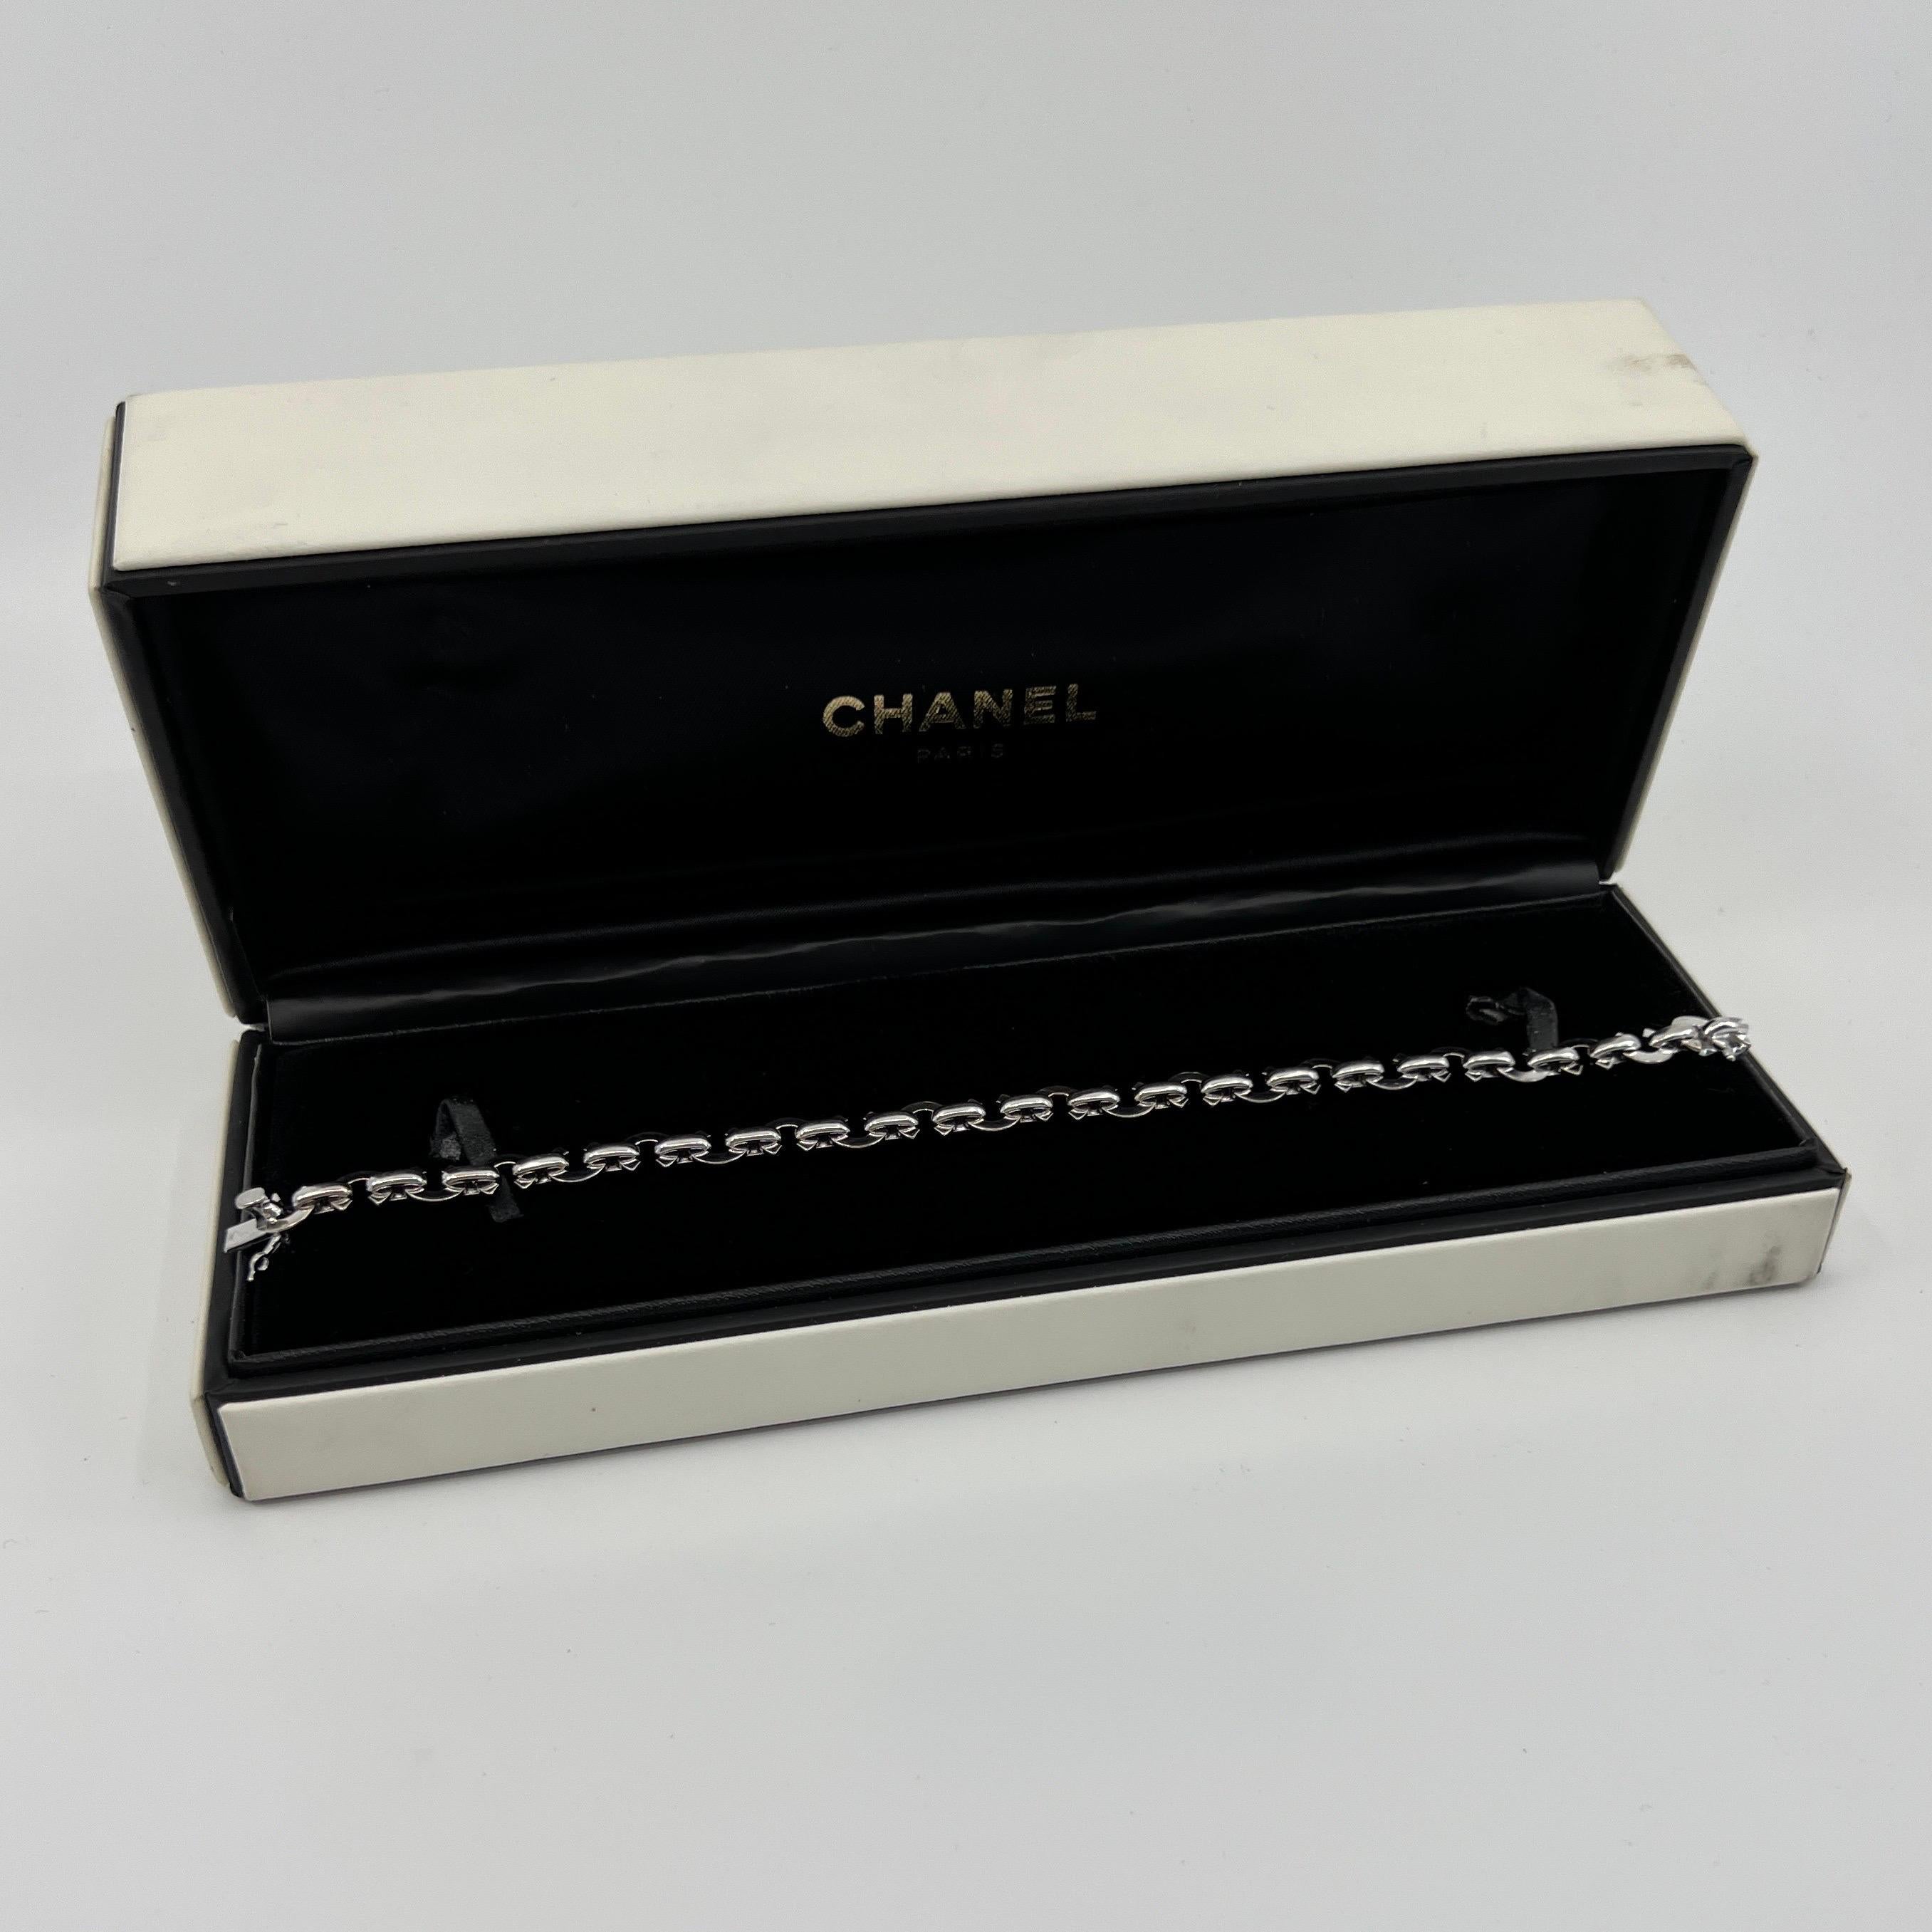 Rare Limited Edition Chanel C Link Charm 18k White Gold Bracelet 20cm With Box In Good Condition For Sale In Birmingham, GB